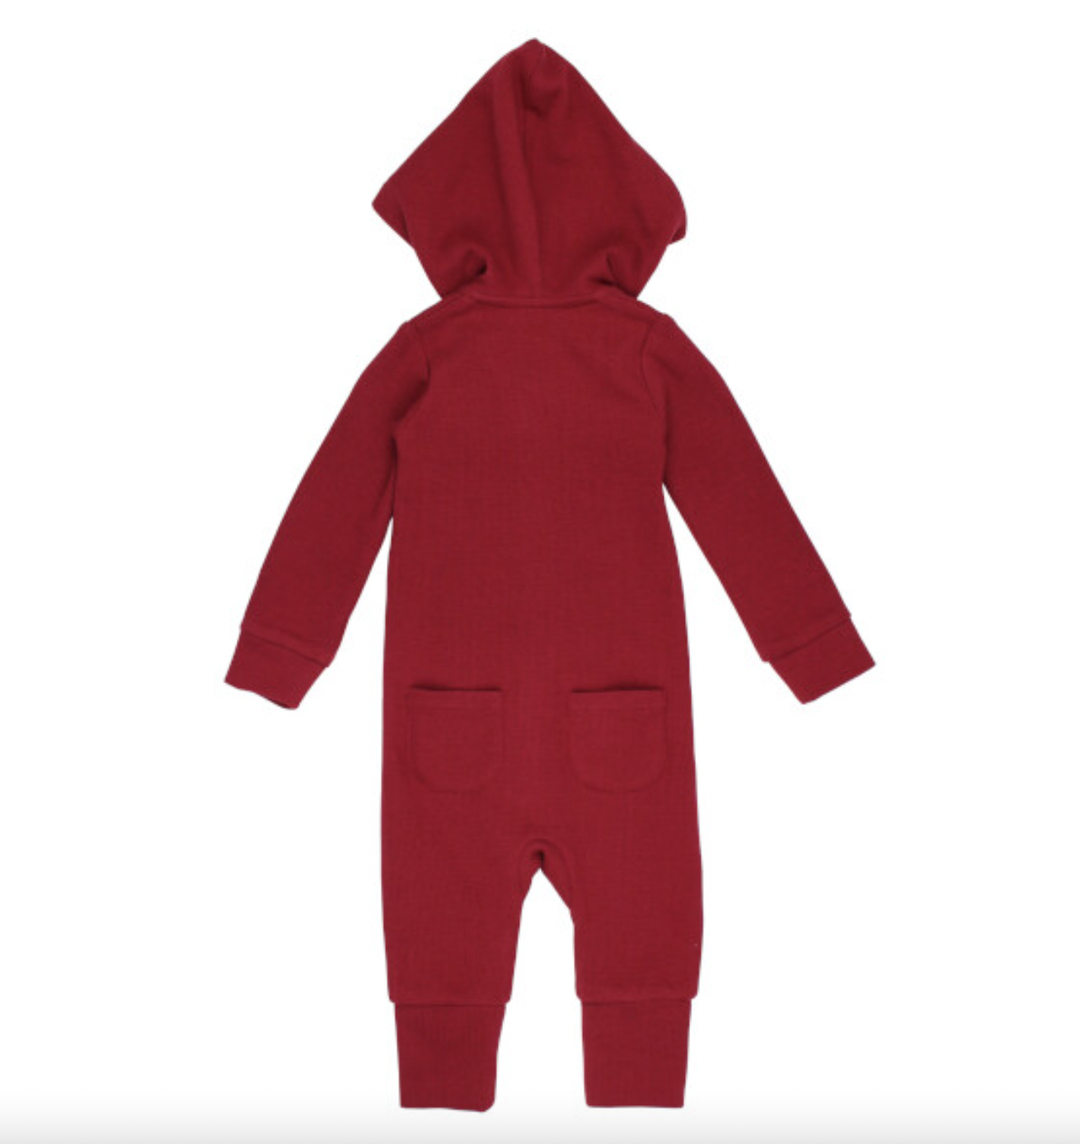 L'oved Baby - Organic Thermal Hooded Zip Romper in Crimson (6-9mo)